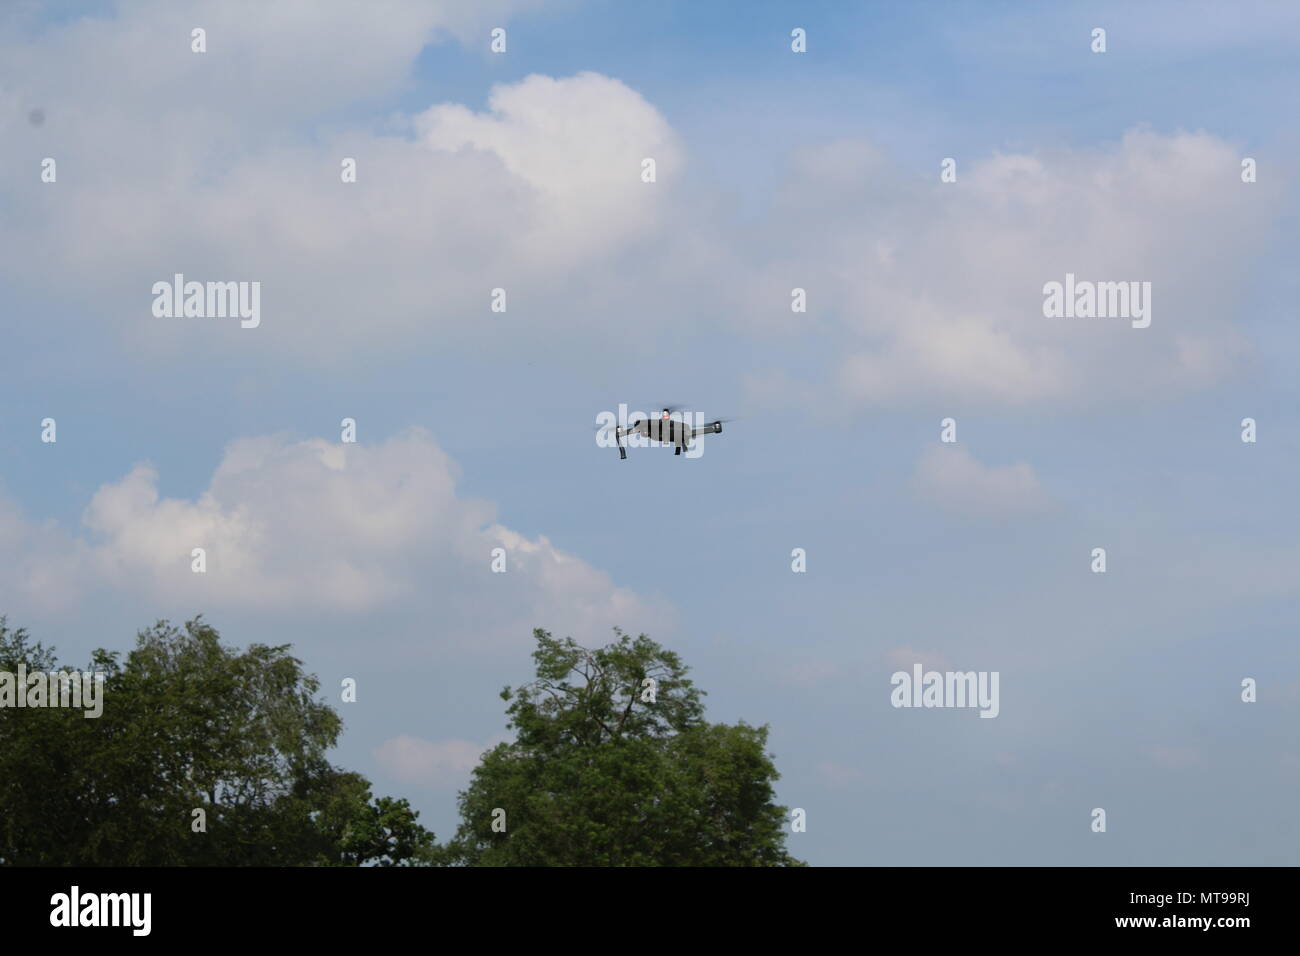 Drone flying above the trees Stock Photo